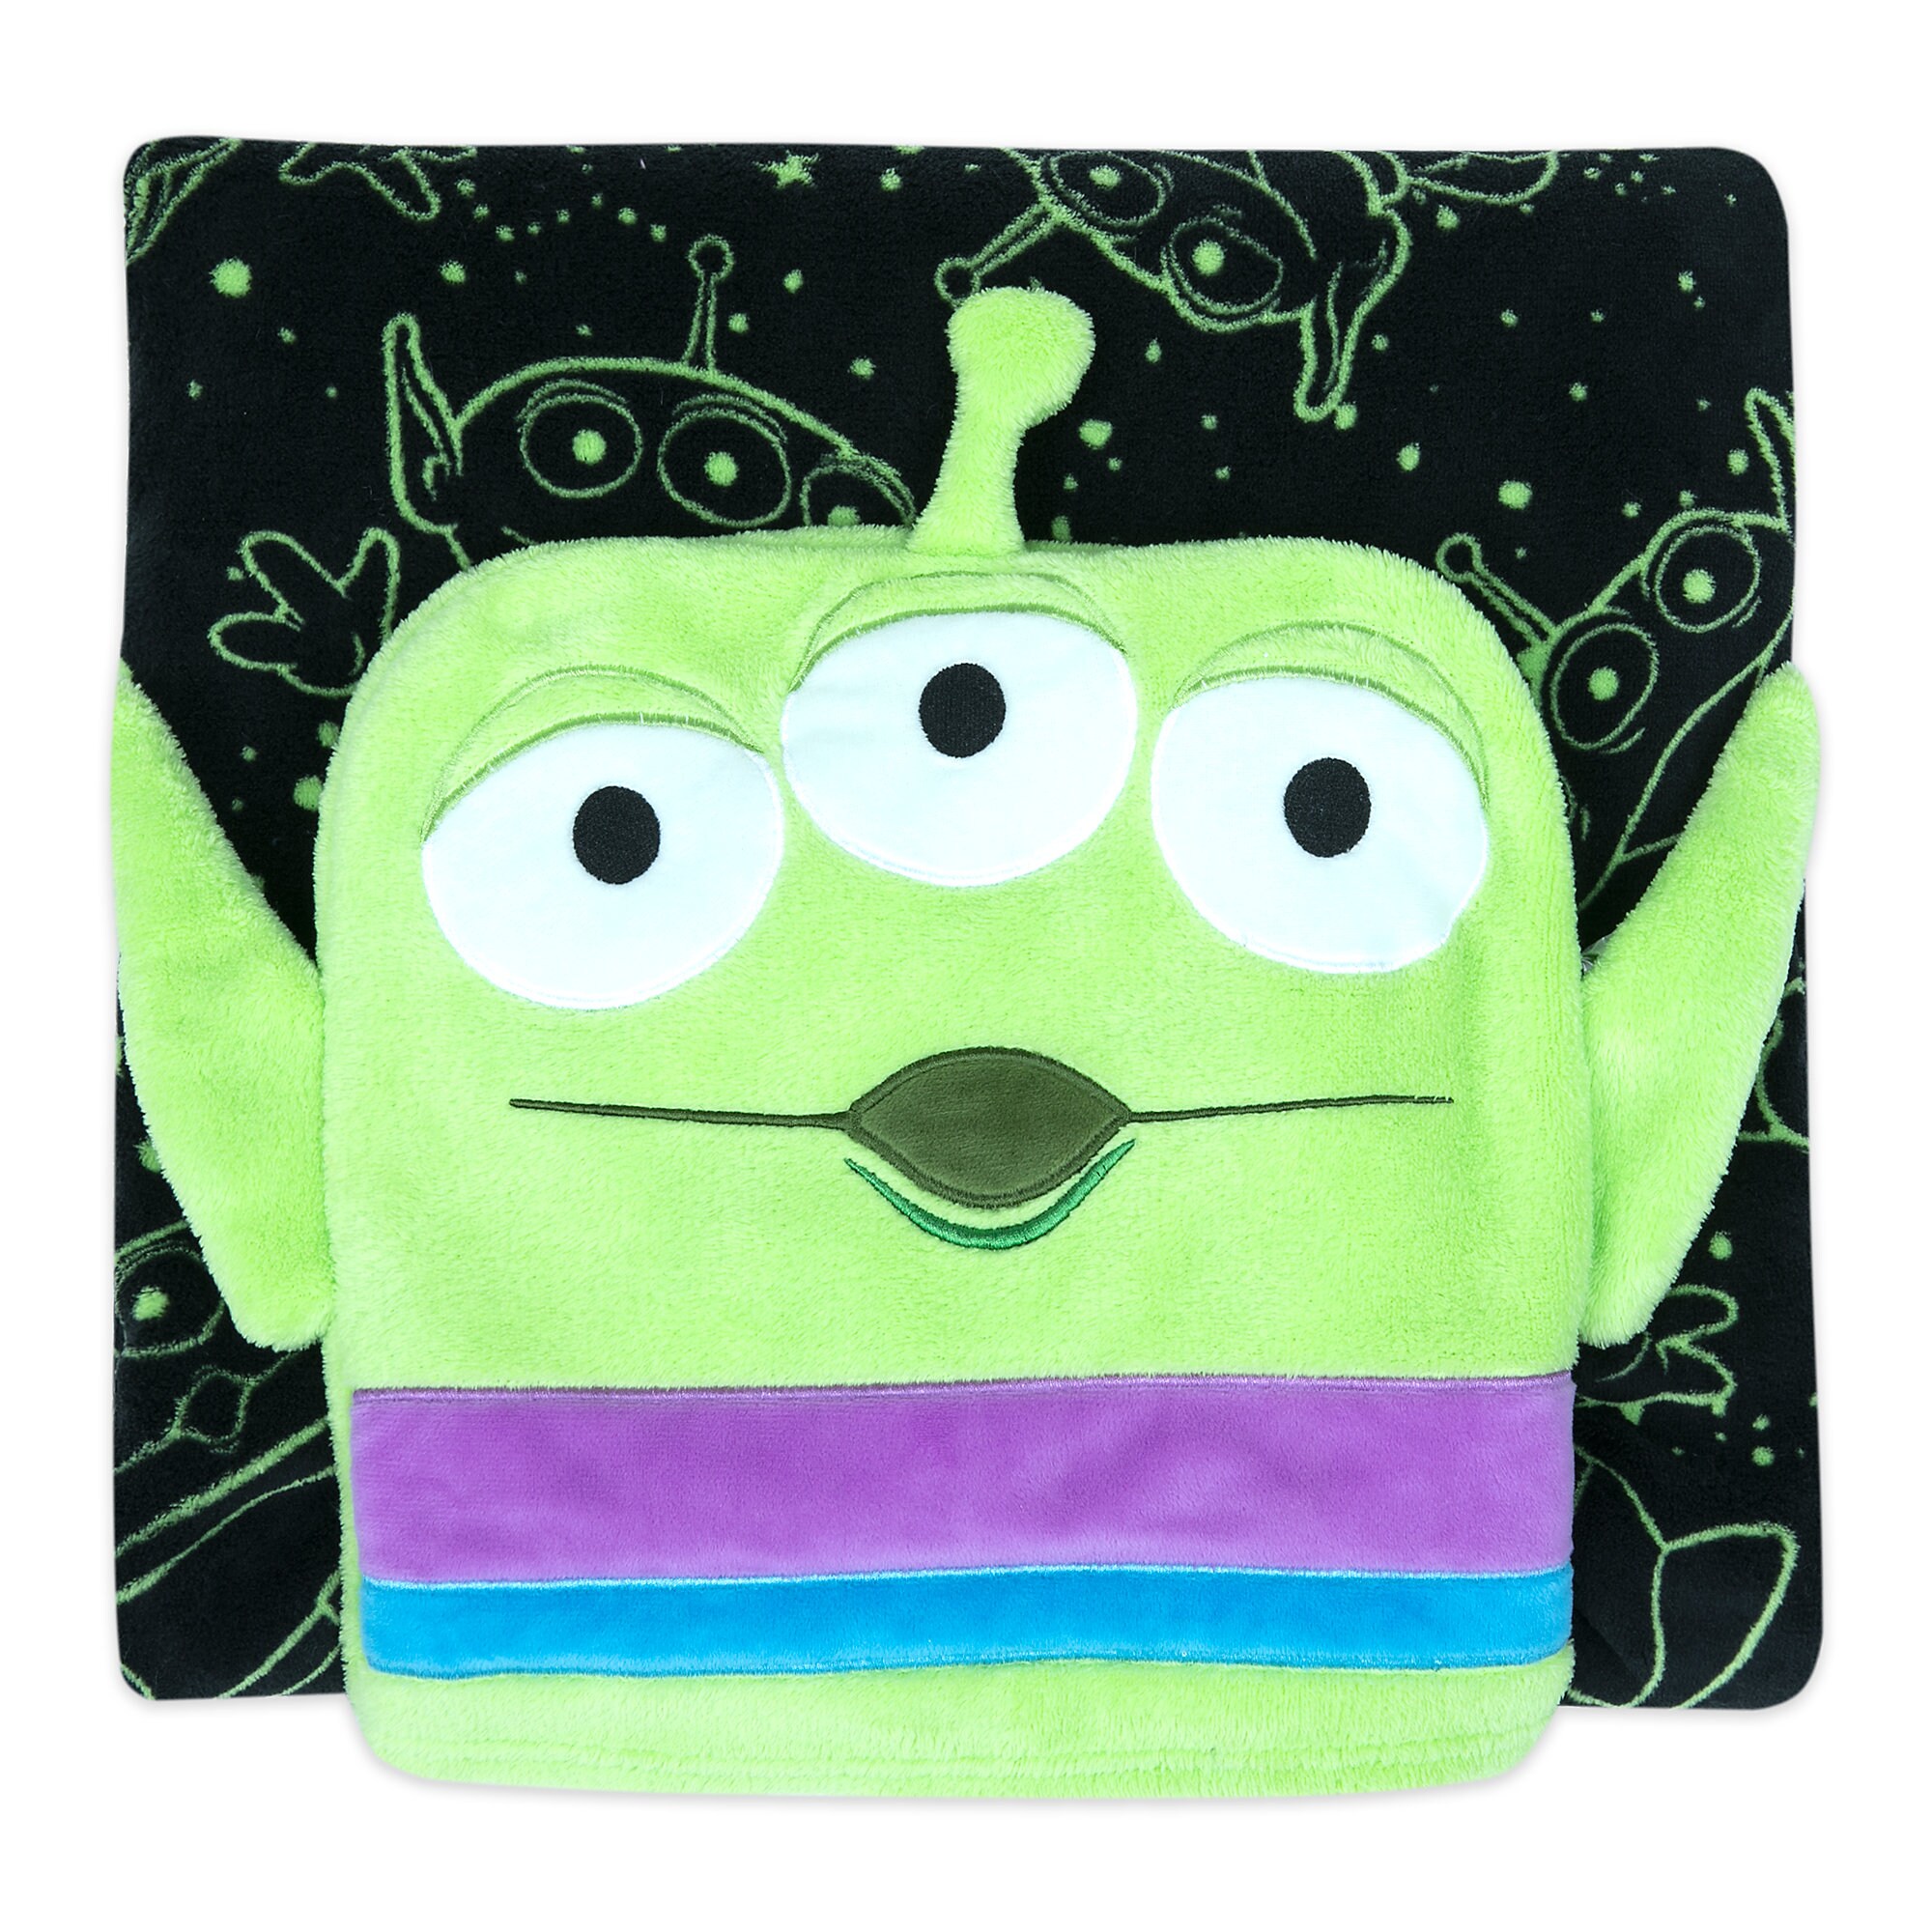 Toy Story Alien Convertible Fleece Throw - Personalized